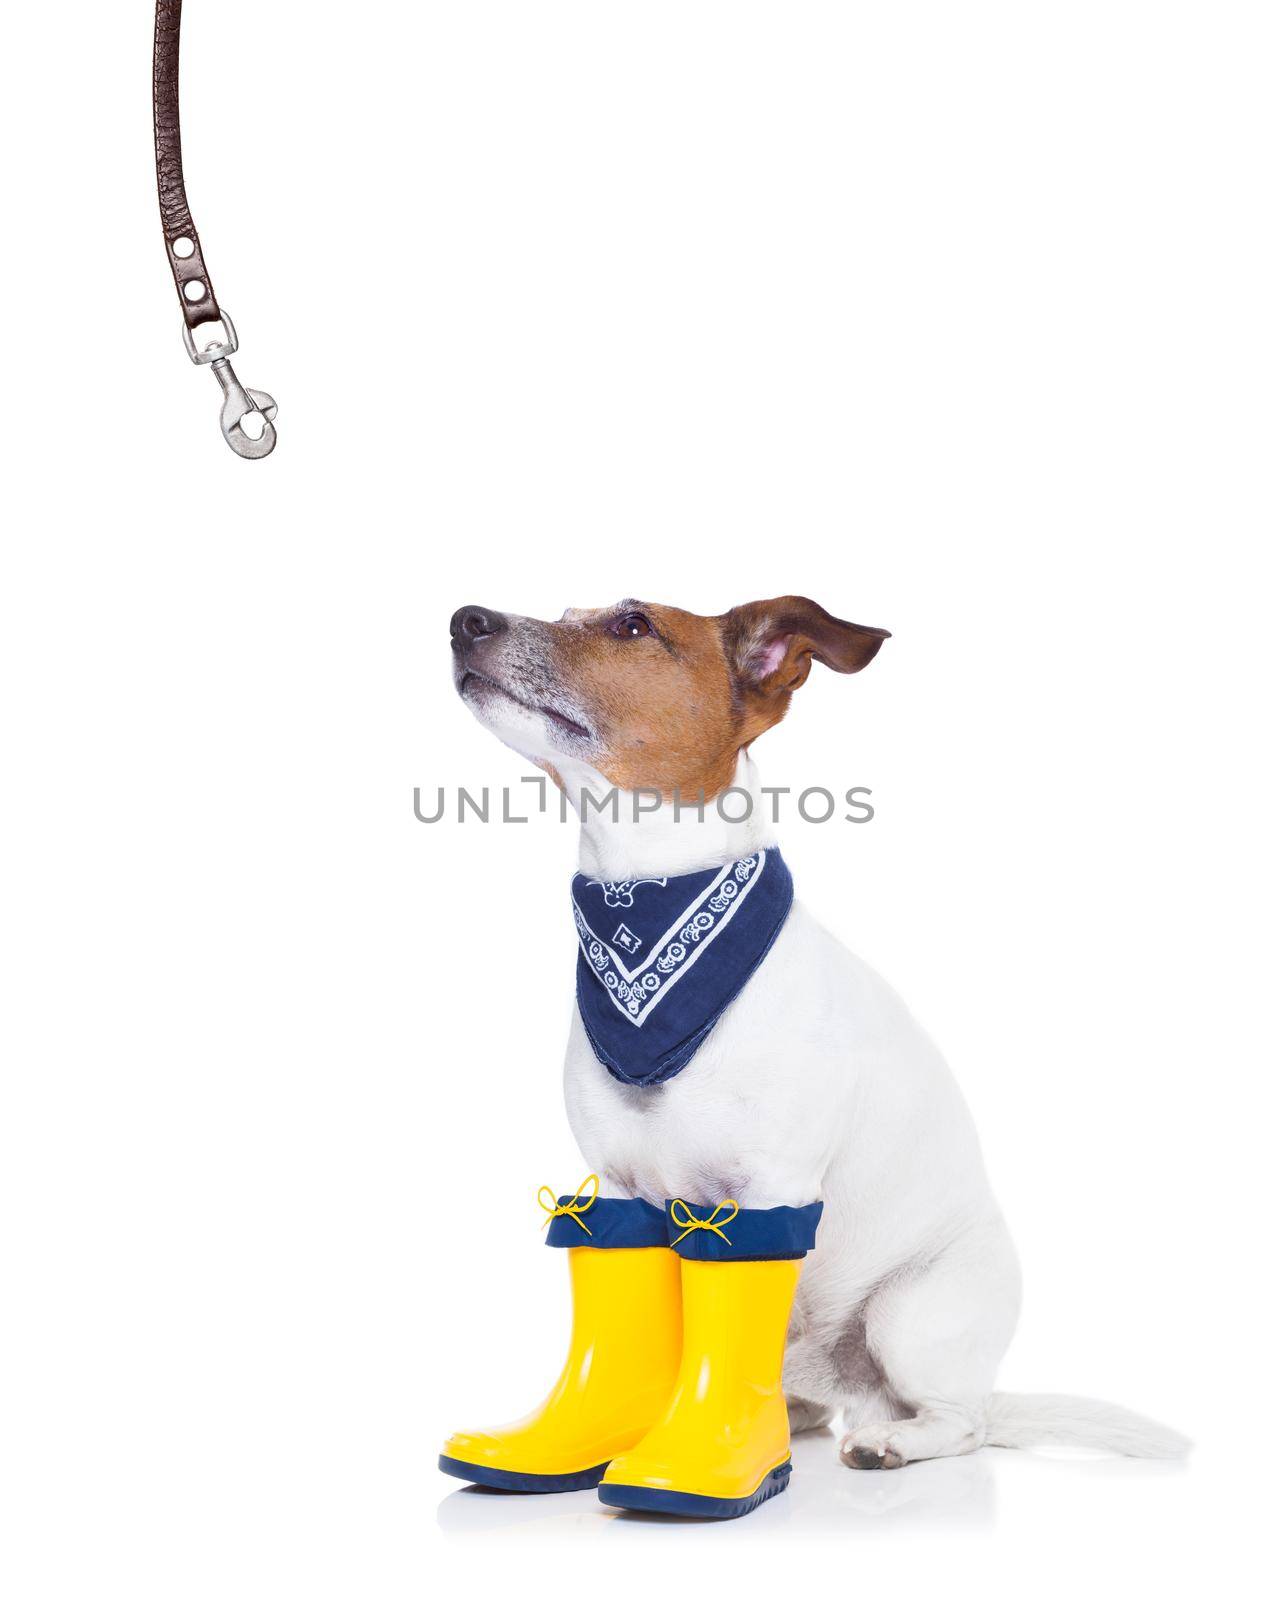 jack russell dog sitting , begging and waiting to go for a walk with owner , prepared for rain and dirt, wearing rain boots,  isolated on white background